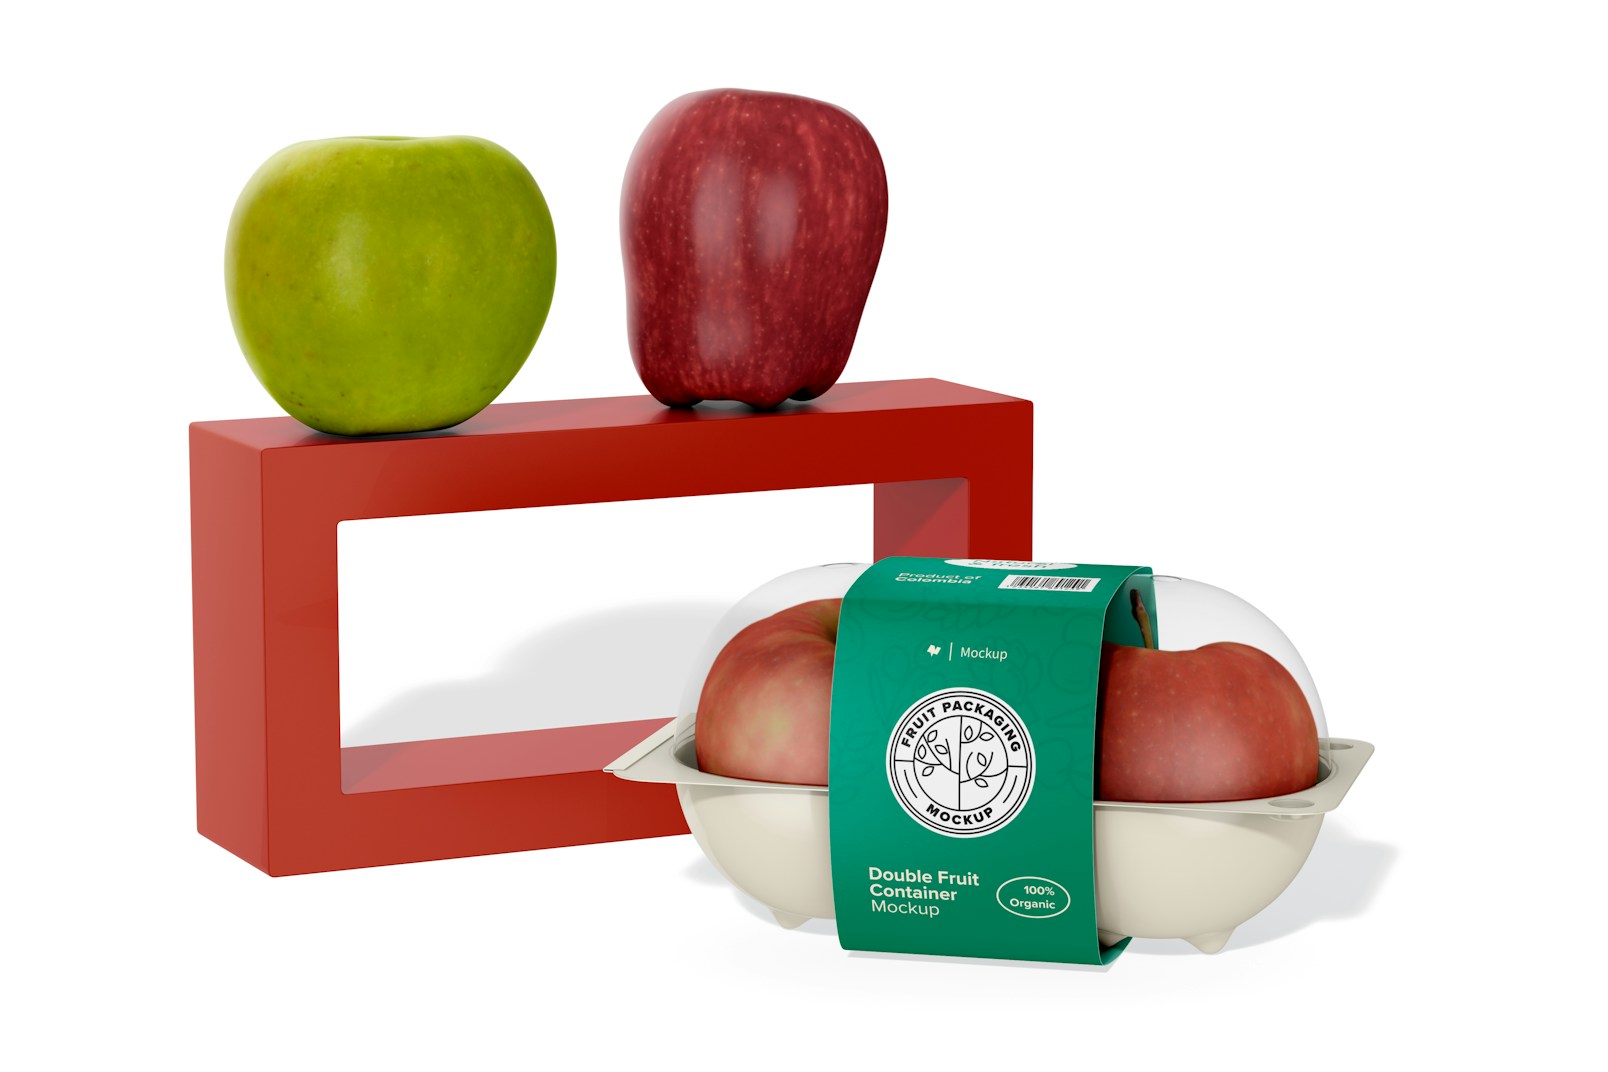 Double Fruit Container Mockup, Perspective